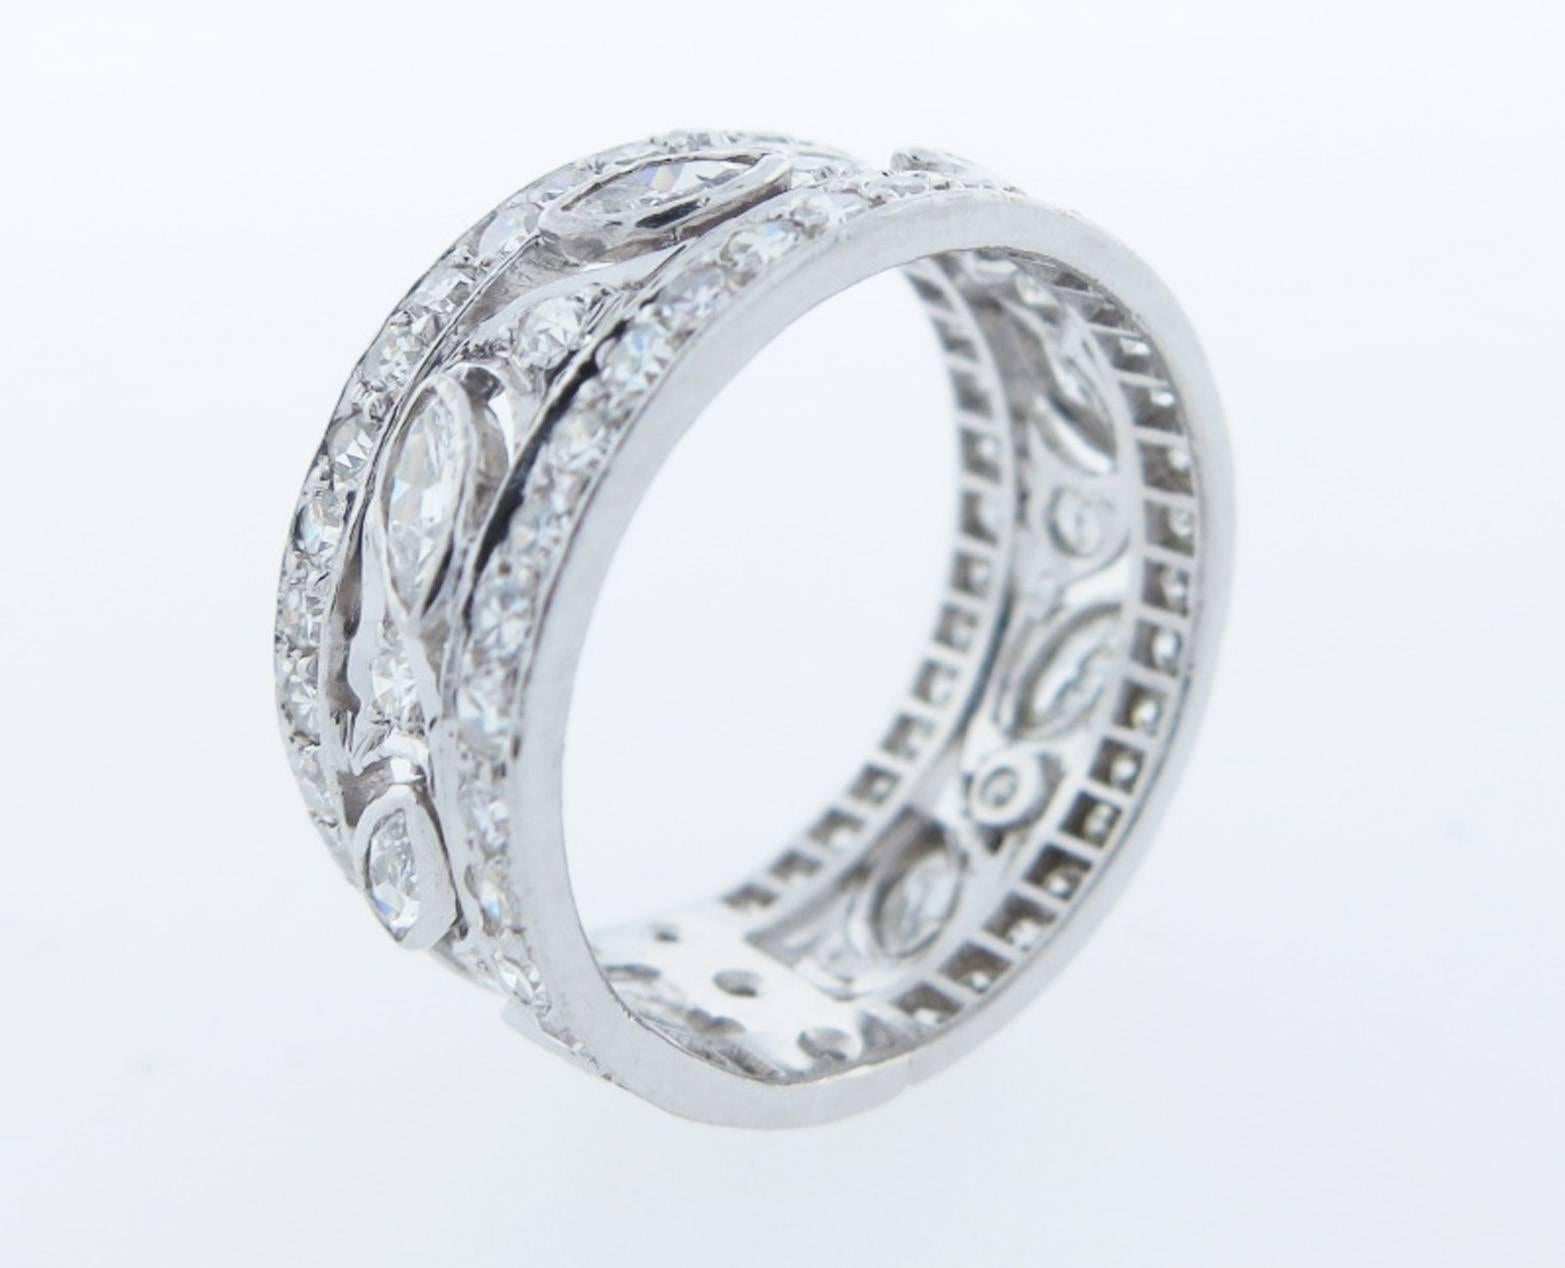 Handmade platinum mount 8.mm. wide diamond band size 6 1/2 . The center is bezel set with 8 marquise cut diamonds and set bead set with 74 round diamonds totaling approx 1.5cts. Circa 1930.